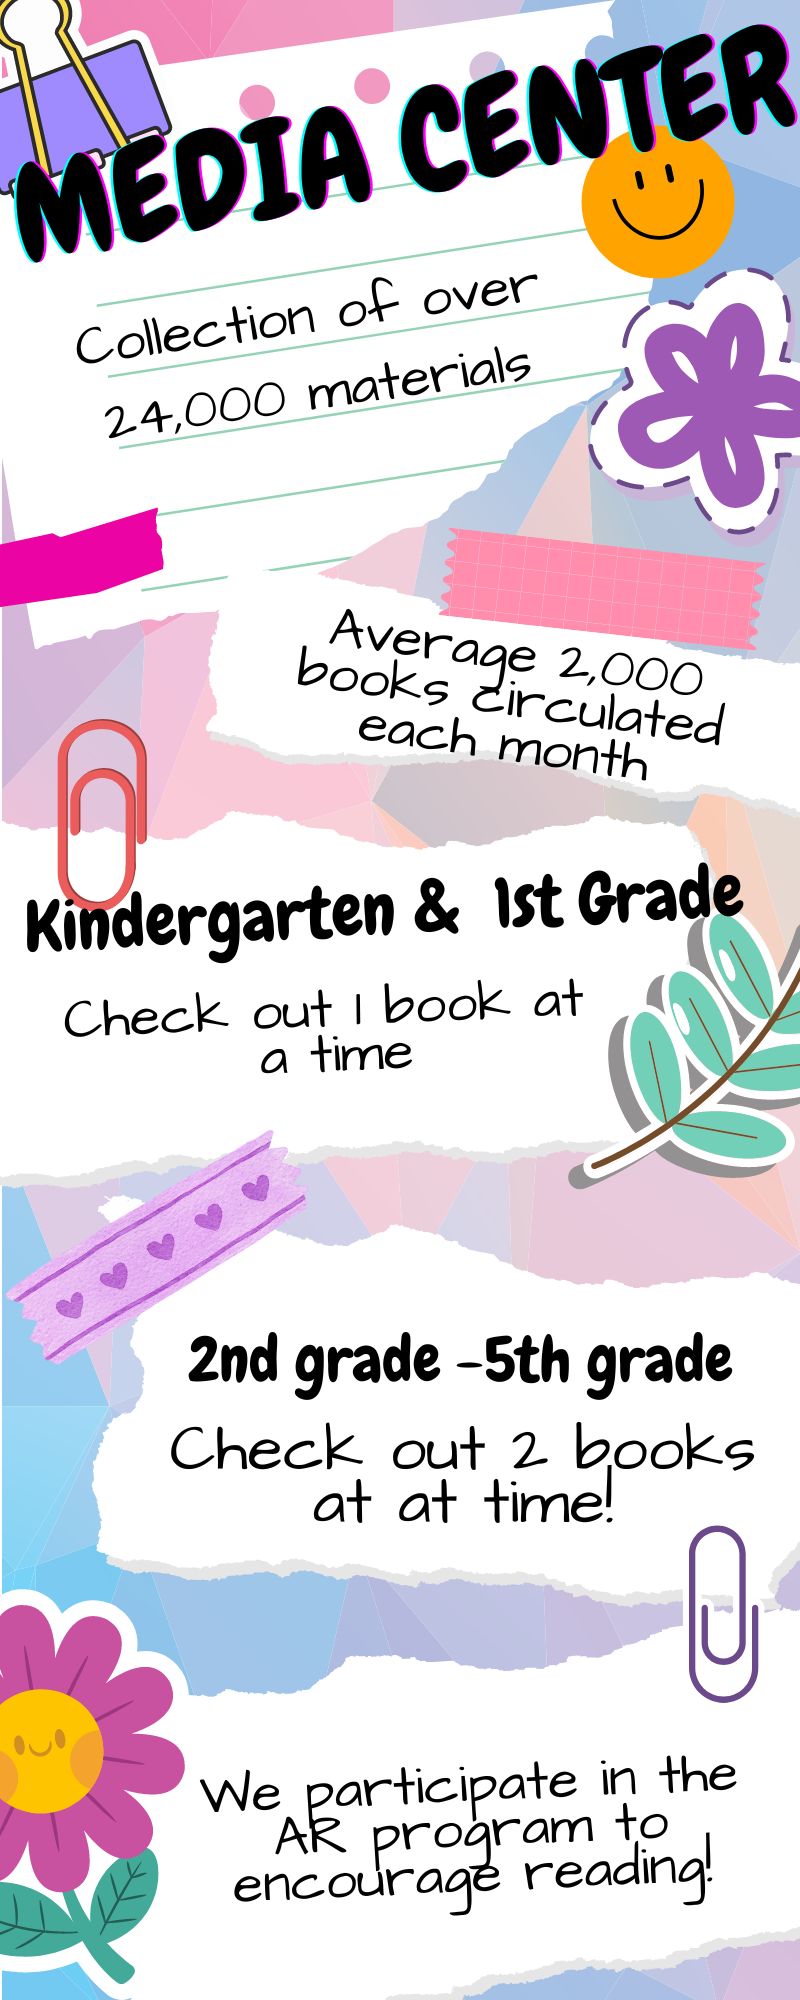 Media Center info: Collection of over 24,000 materials, Average 2,000 book circulated each month, Kindergarten & 1st Grade check out 1 book at a time, 2nd-5th Grade check out 2 book at a time. We participate in the AR program to encourage reading.